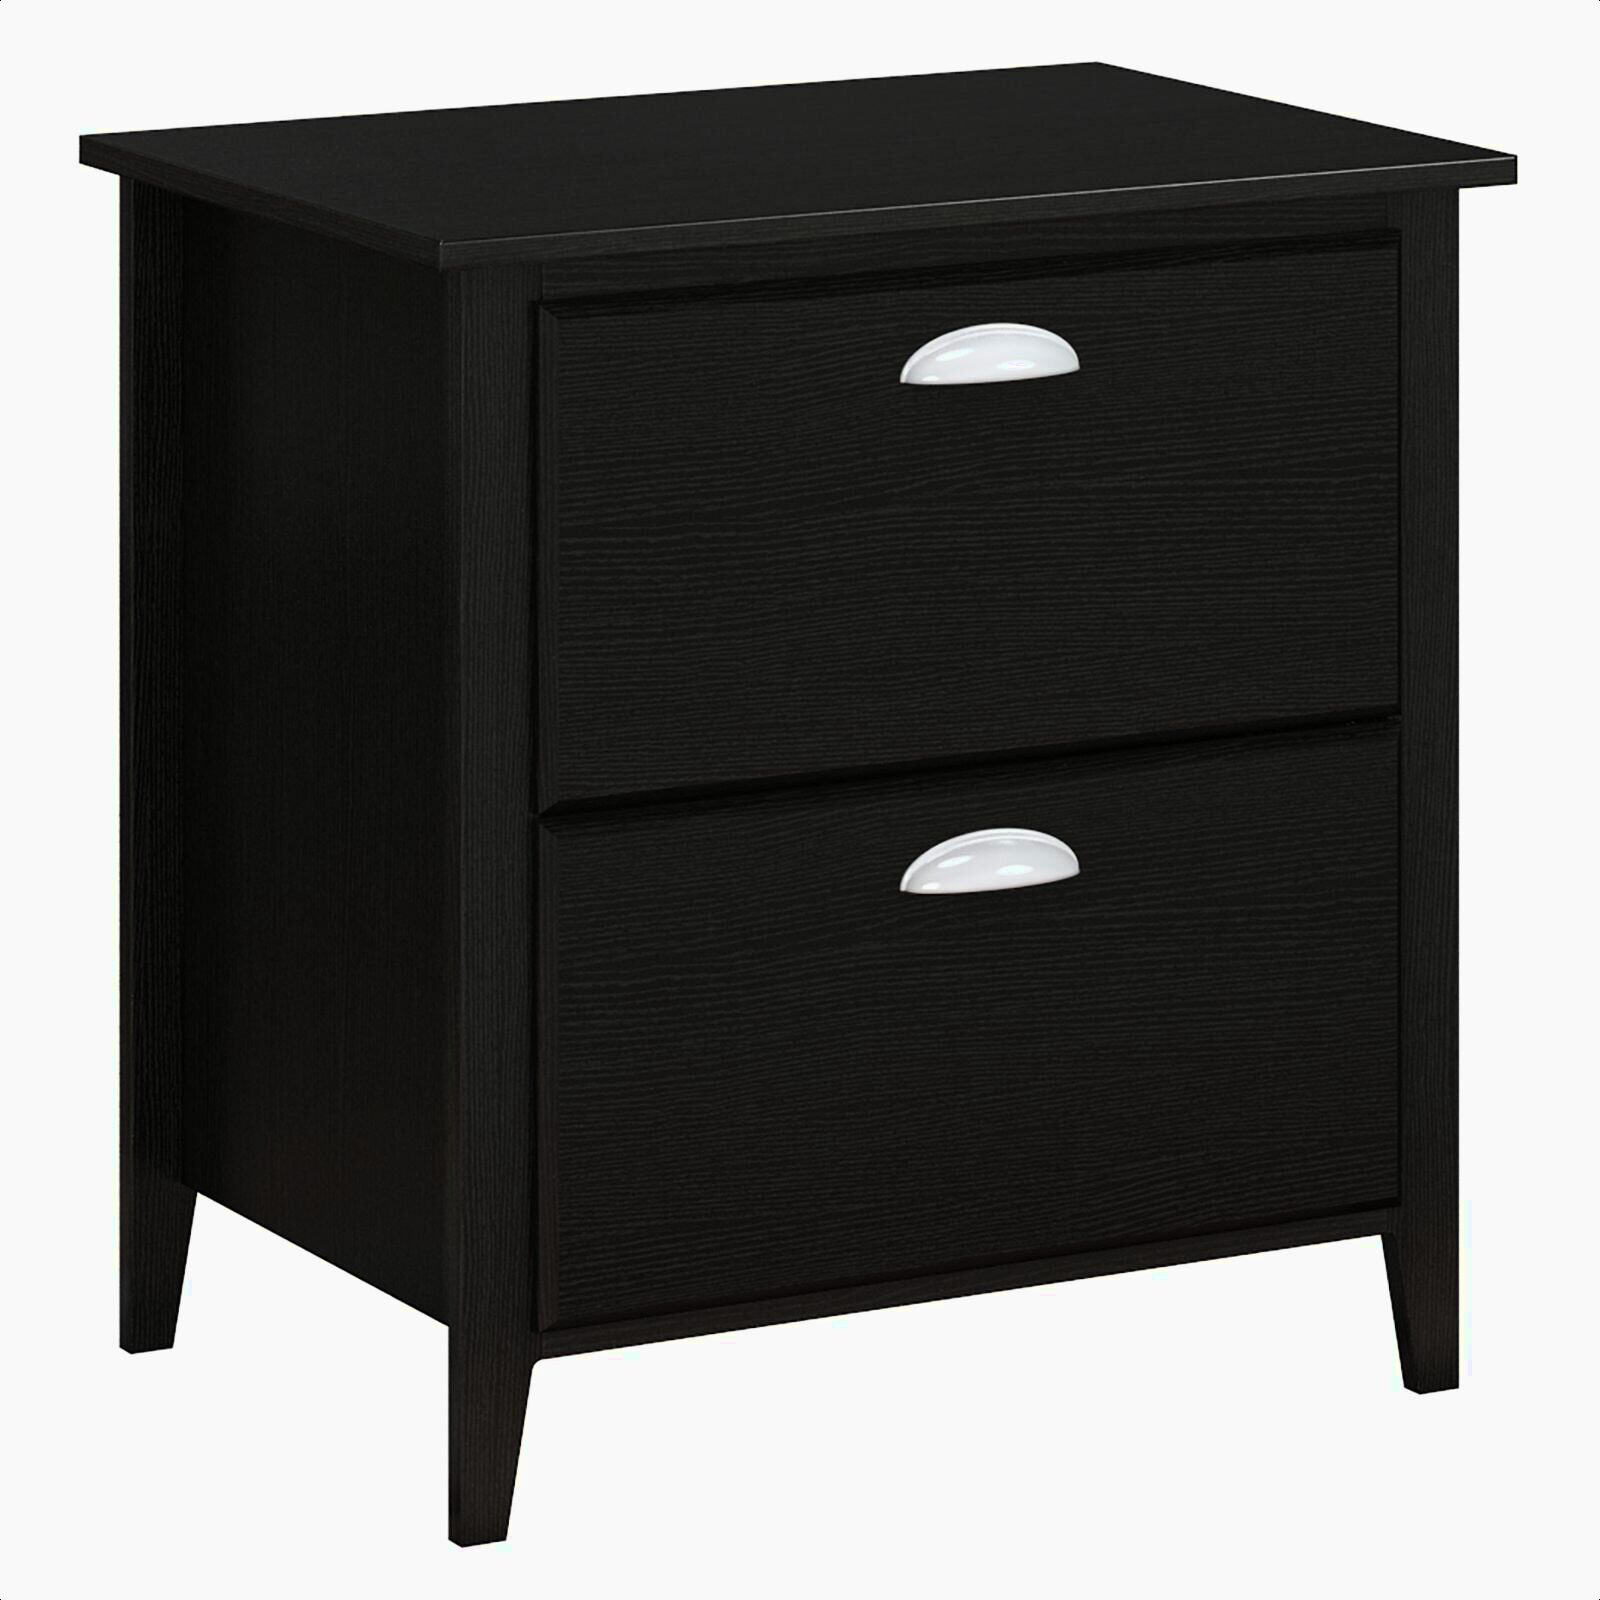 Milanhome Connecticut 2-Drawer Lateral Filing Cabinet - image 4 of 7